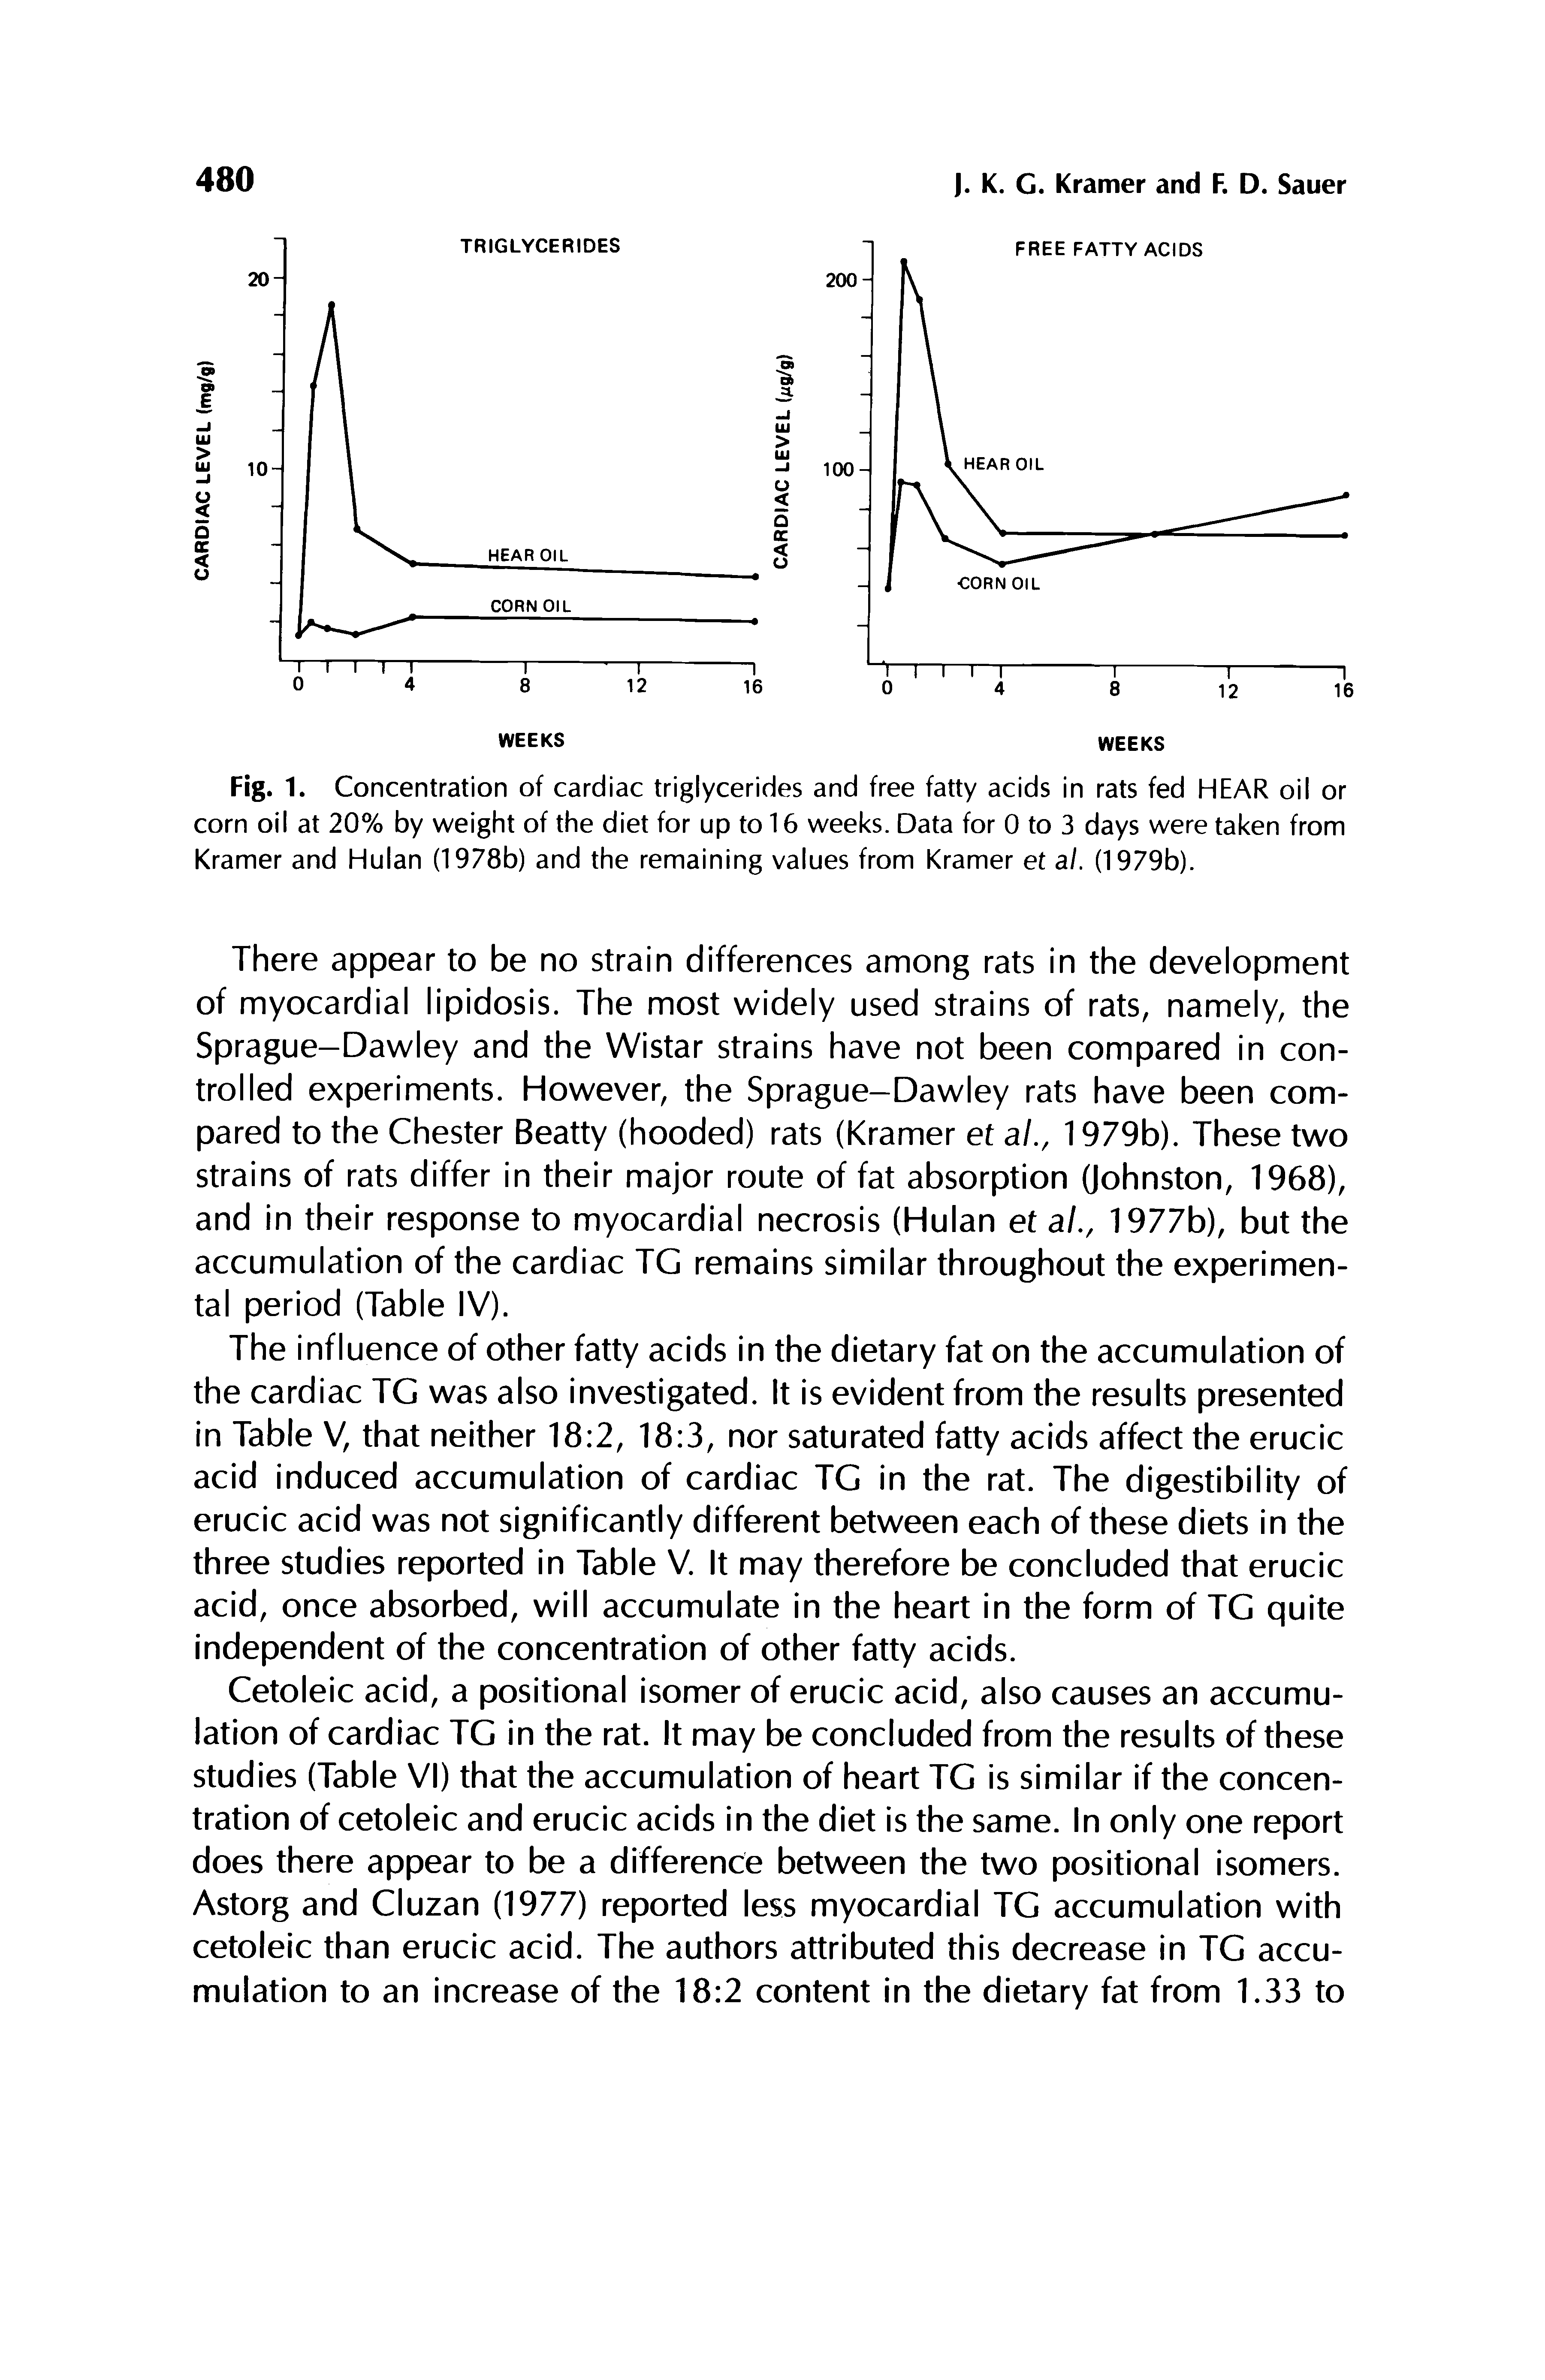 Fig. 1. Concentration of cardiac triglycerides and free fatty acids in rats fed HEAR oil or corn oil at 20% by weight of the diet for up to 16 weeks. Data for 0 to 3 days were taken from Kramer and Hulan (1978b) and the remaining values from Kramer et a/. (1979b).